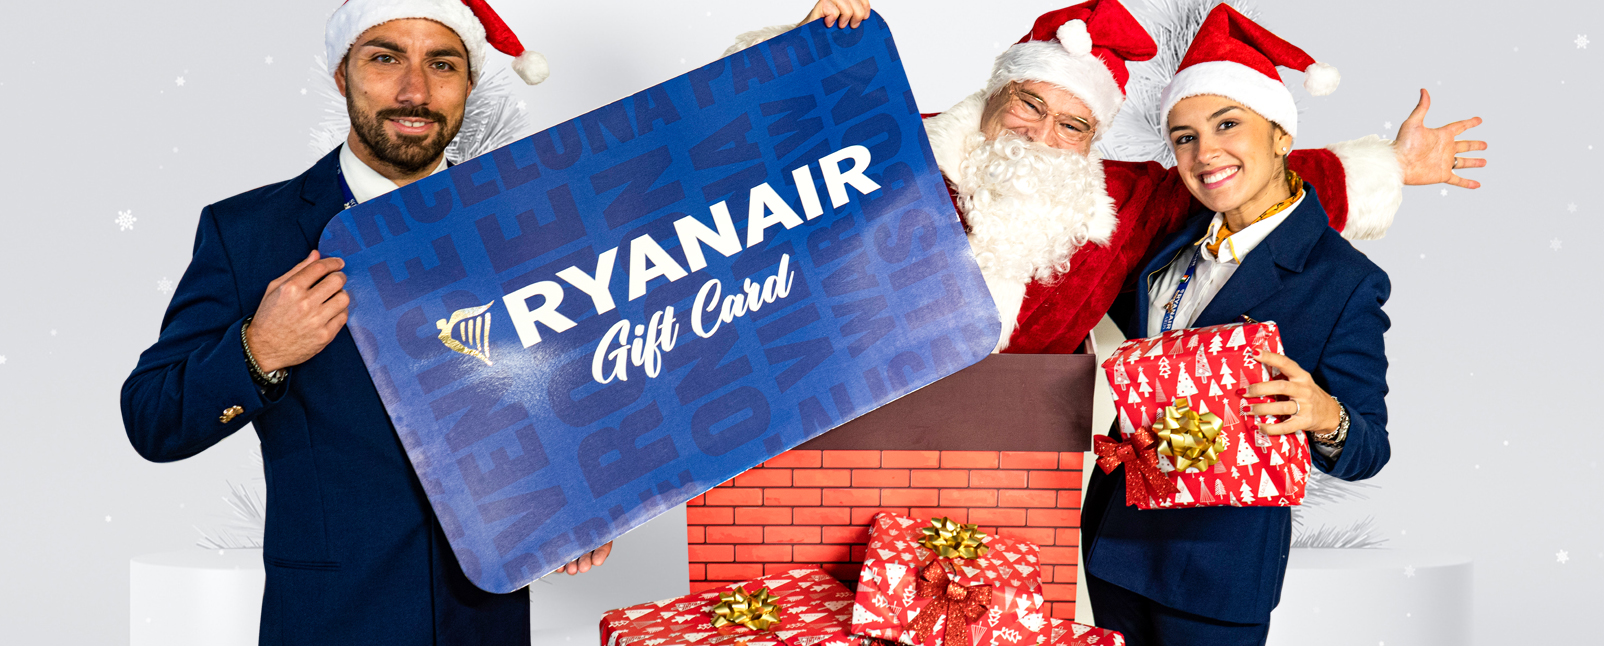 Get The Ultimate Travel Gift Delivered Straight To Your Door This Christmas With Ryanair’s New Gift Cards